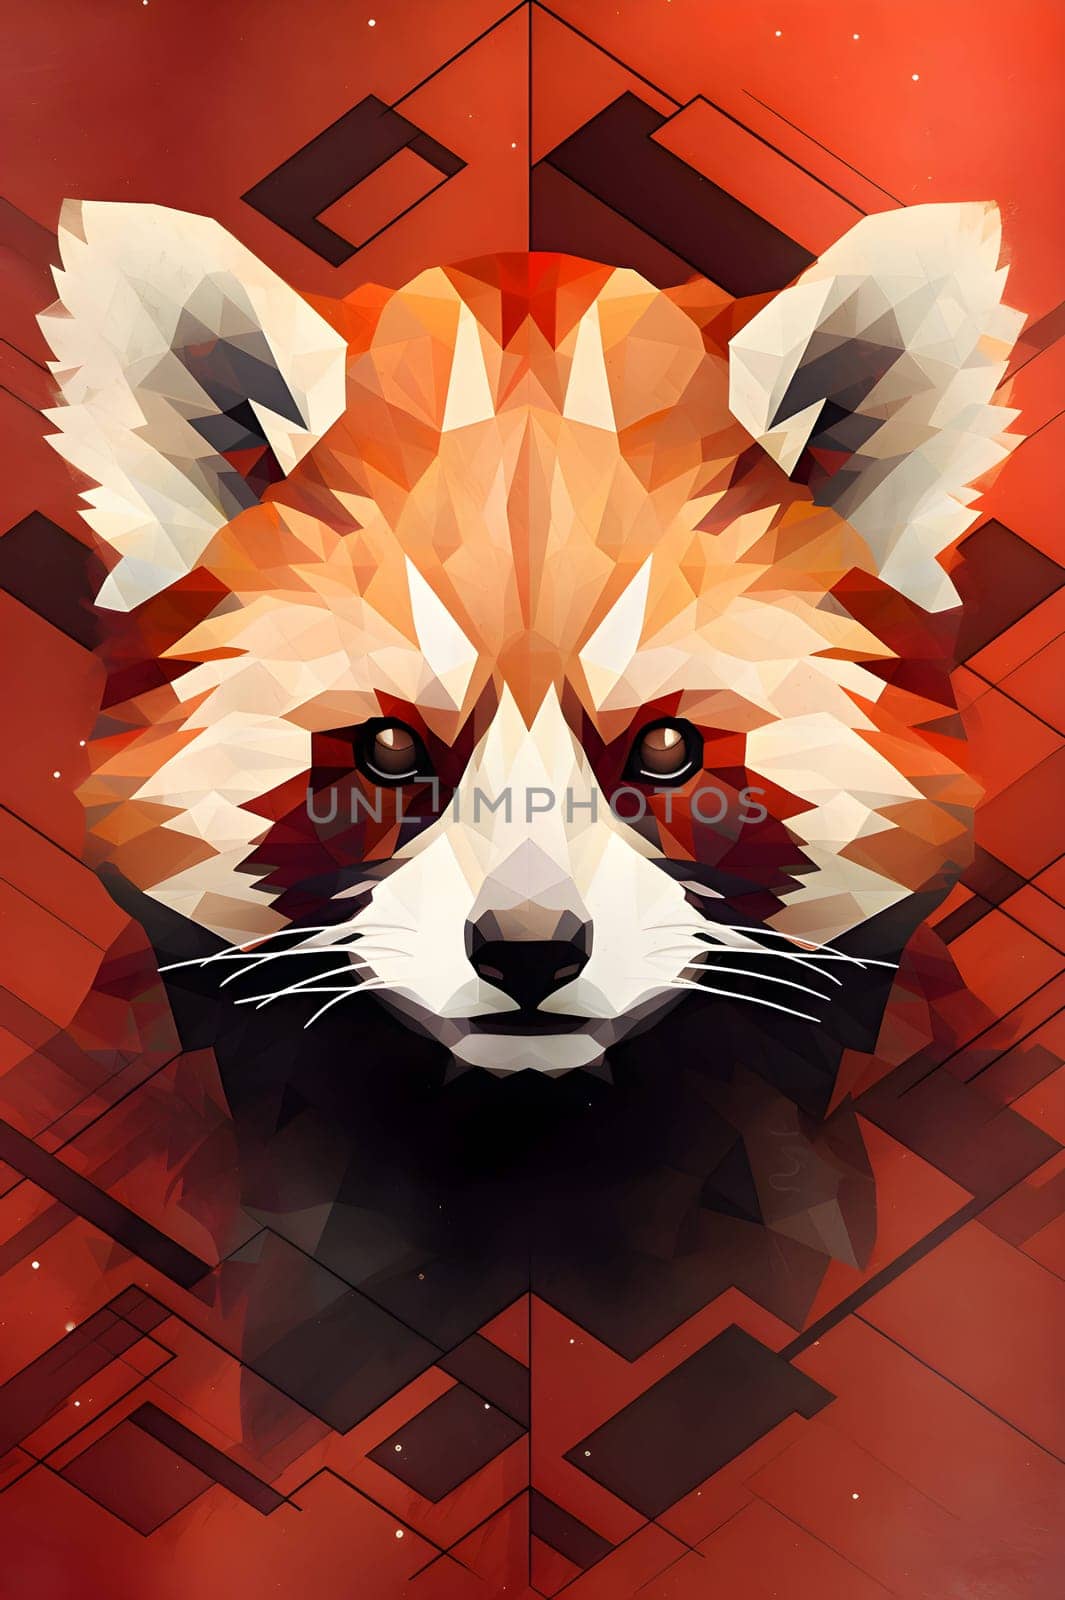 Abstract illustration: Red panda head on abstract geometric background. Vector polygonal illustration.